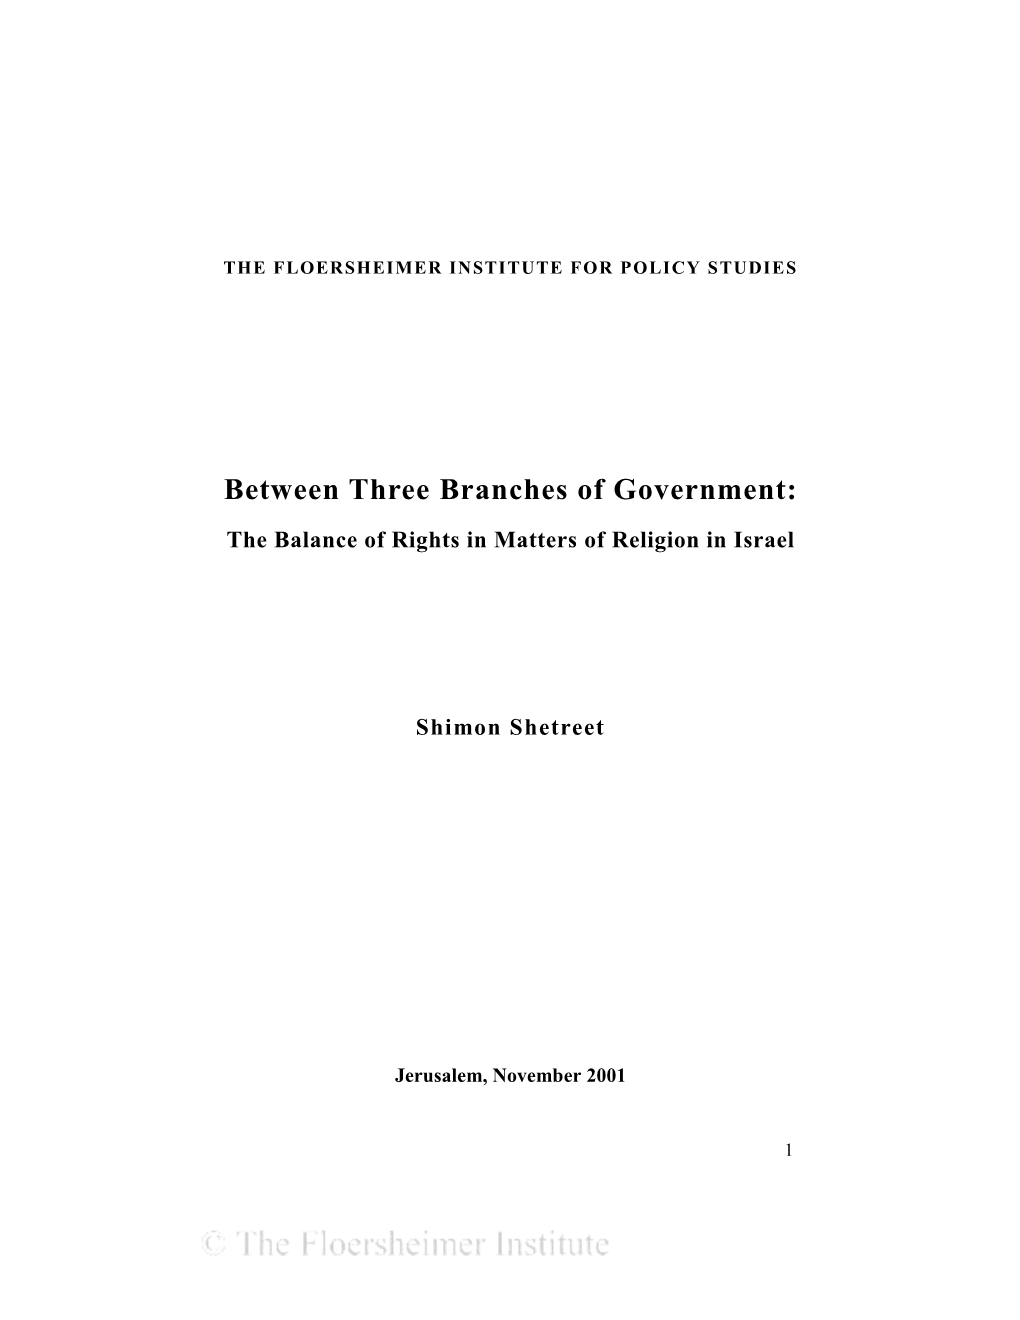 Between Three Branches of Government: the Balance of Rights in Matters of Religion in Israel